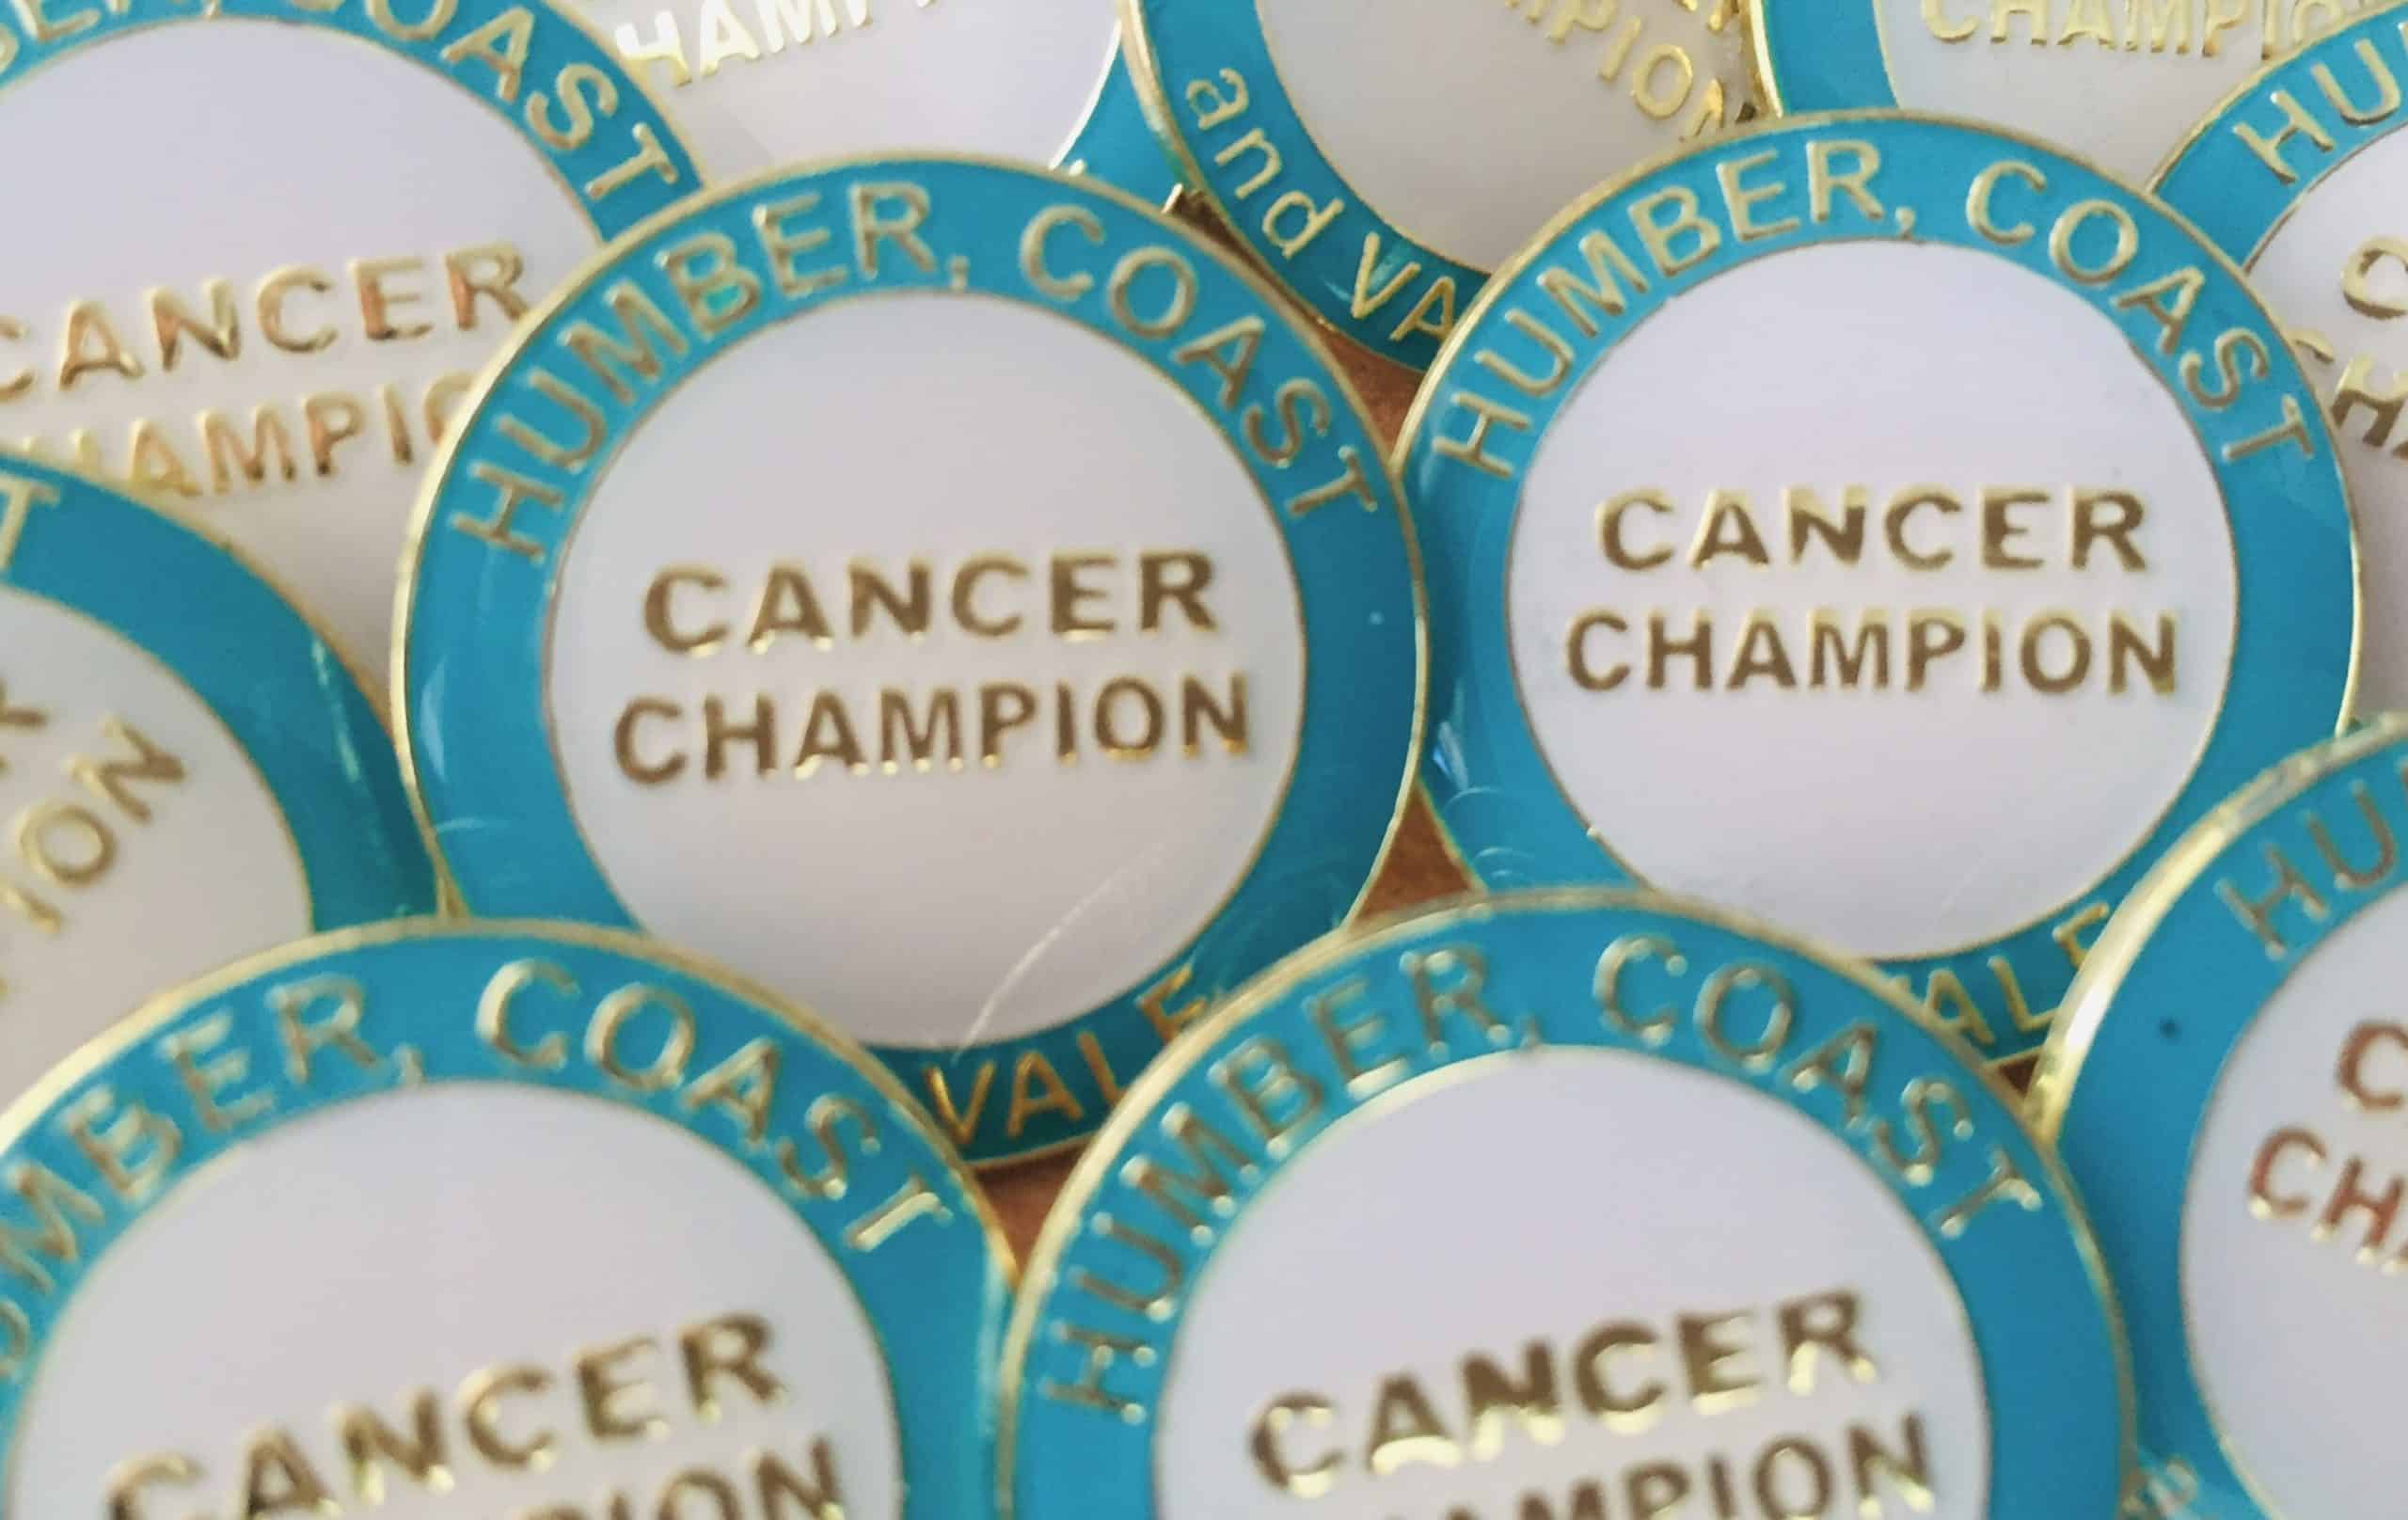 Up close photo of Humber, Coast and Vale Cancer Alliance Cancer Champion badges. The badge is a white circle with a blue border, and they say 'Cancer Champion' in the middle.